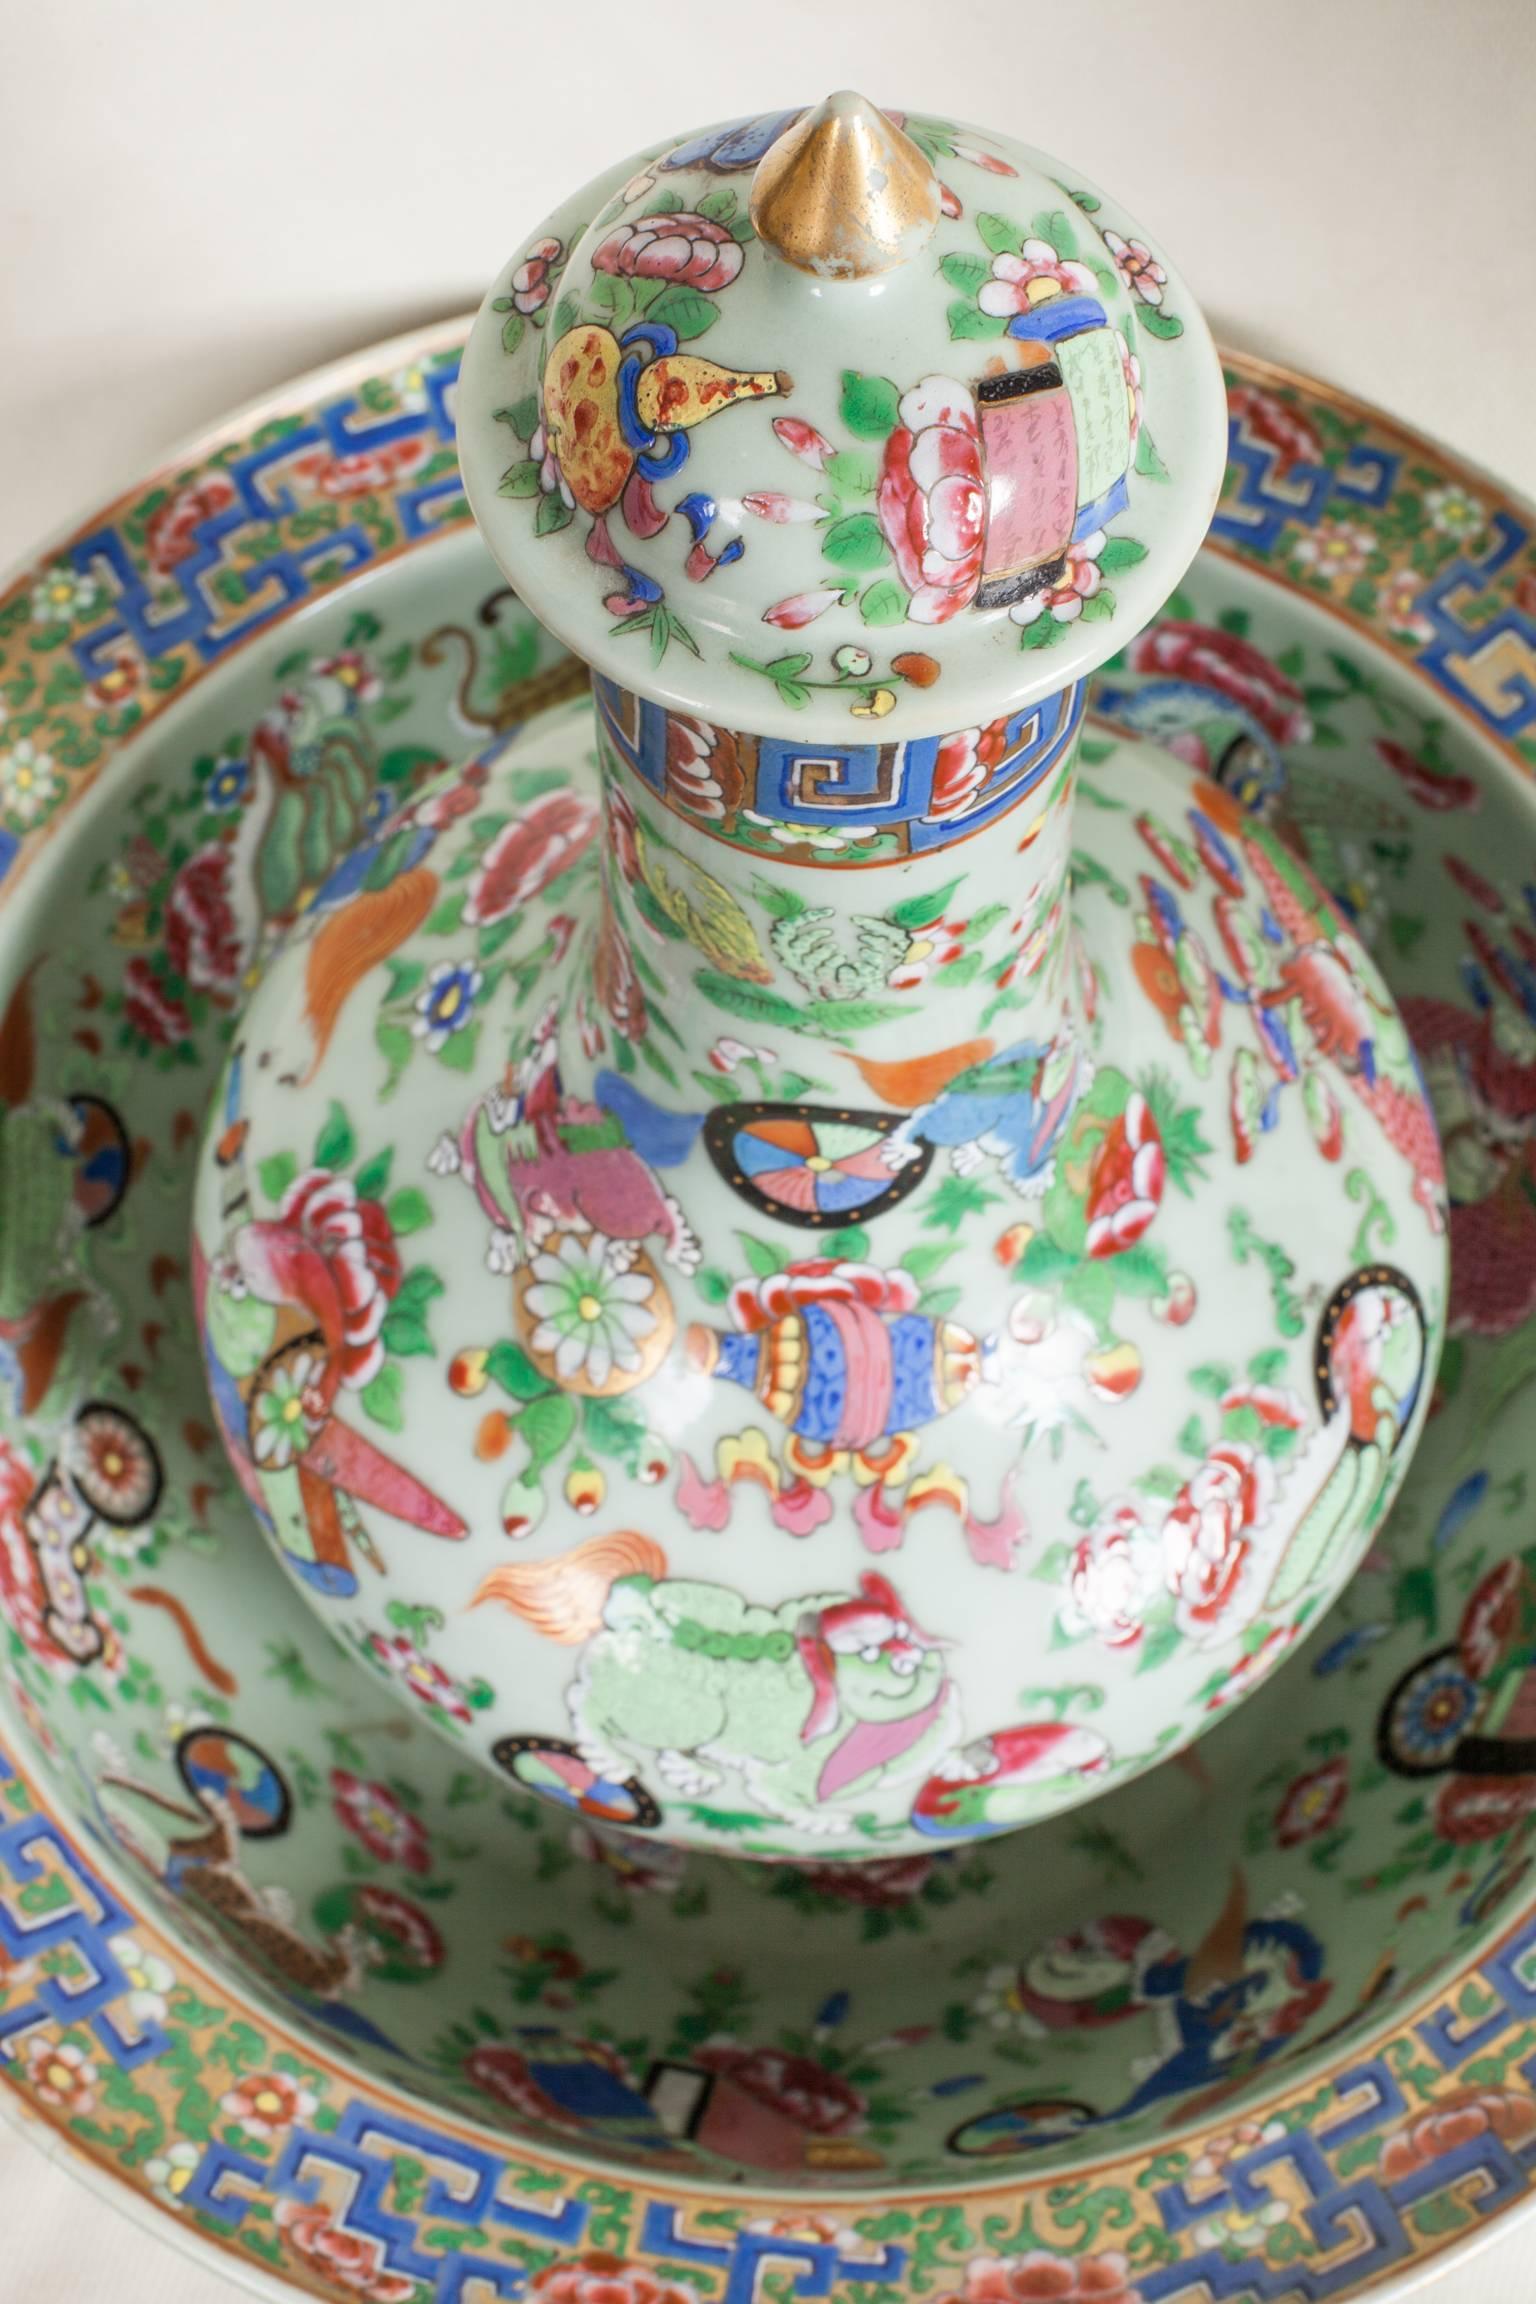 Chinese export celadon porcelain guglet with cover and basin. It is rare to find the guglet with its cover. This set is finely hand decorated with brightly colored enamels representing mythological and imaginary creatures, symbols, scrolls, lotus